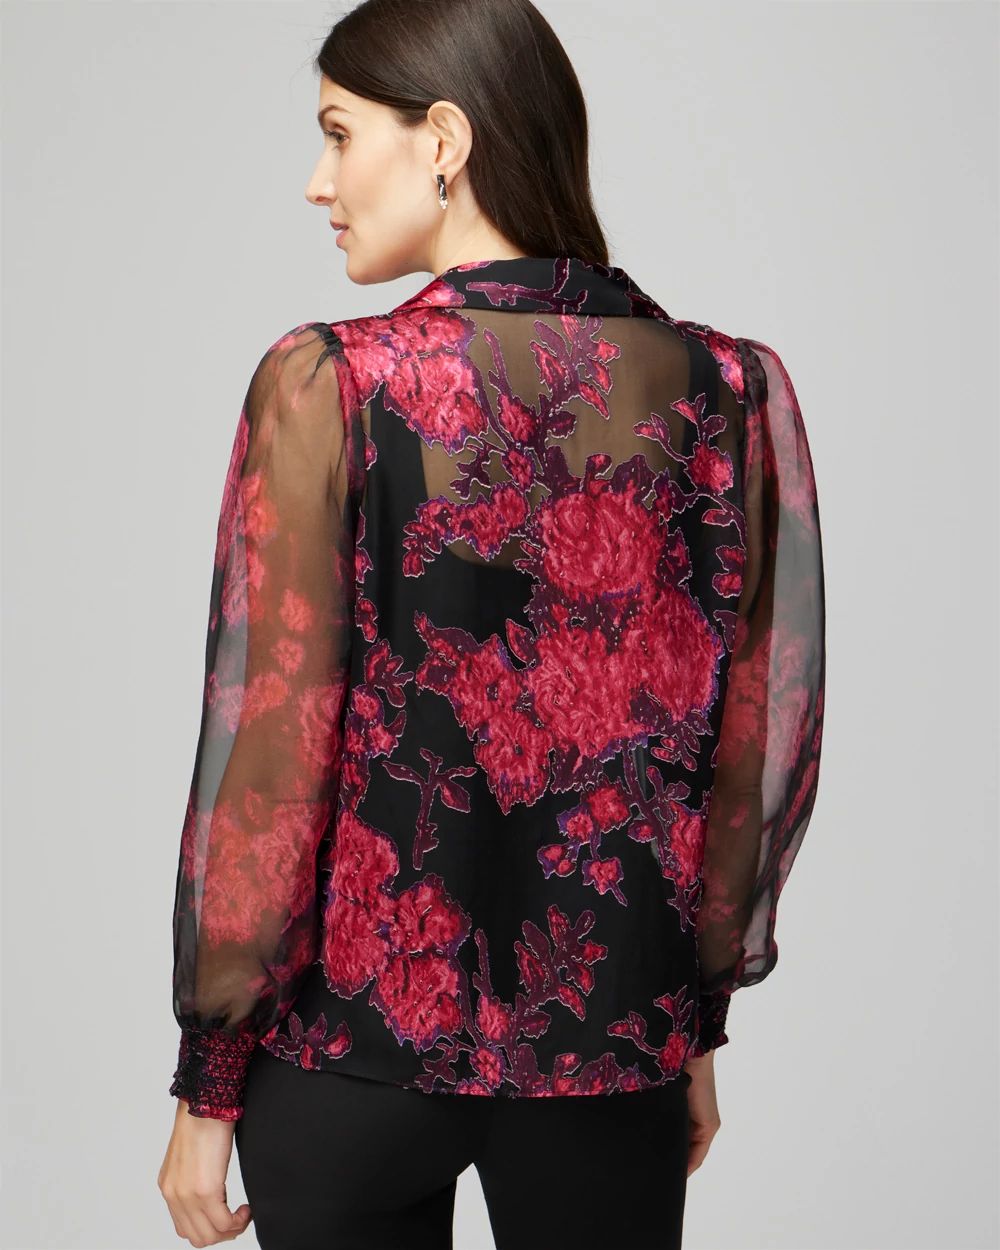 Organza Sleeve Silk Burnout Blouse click to view larger image.